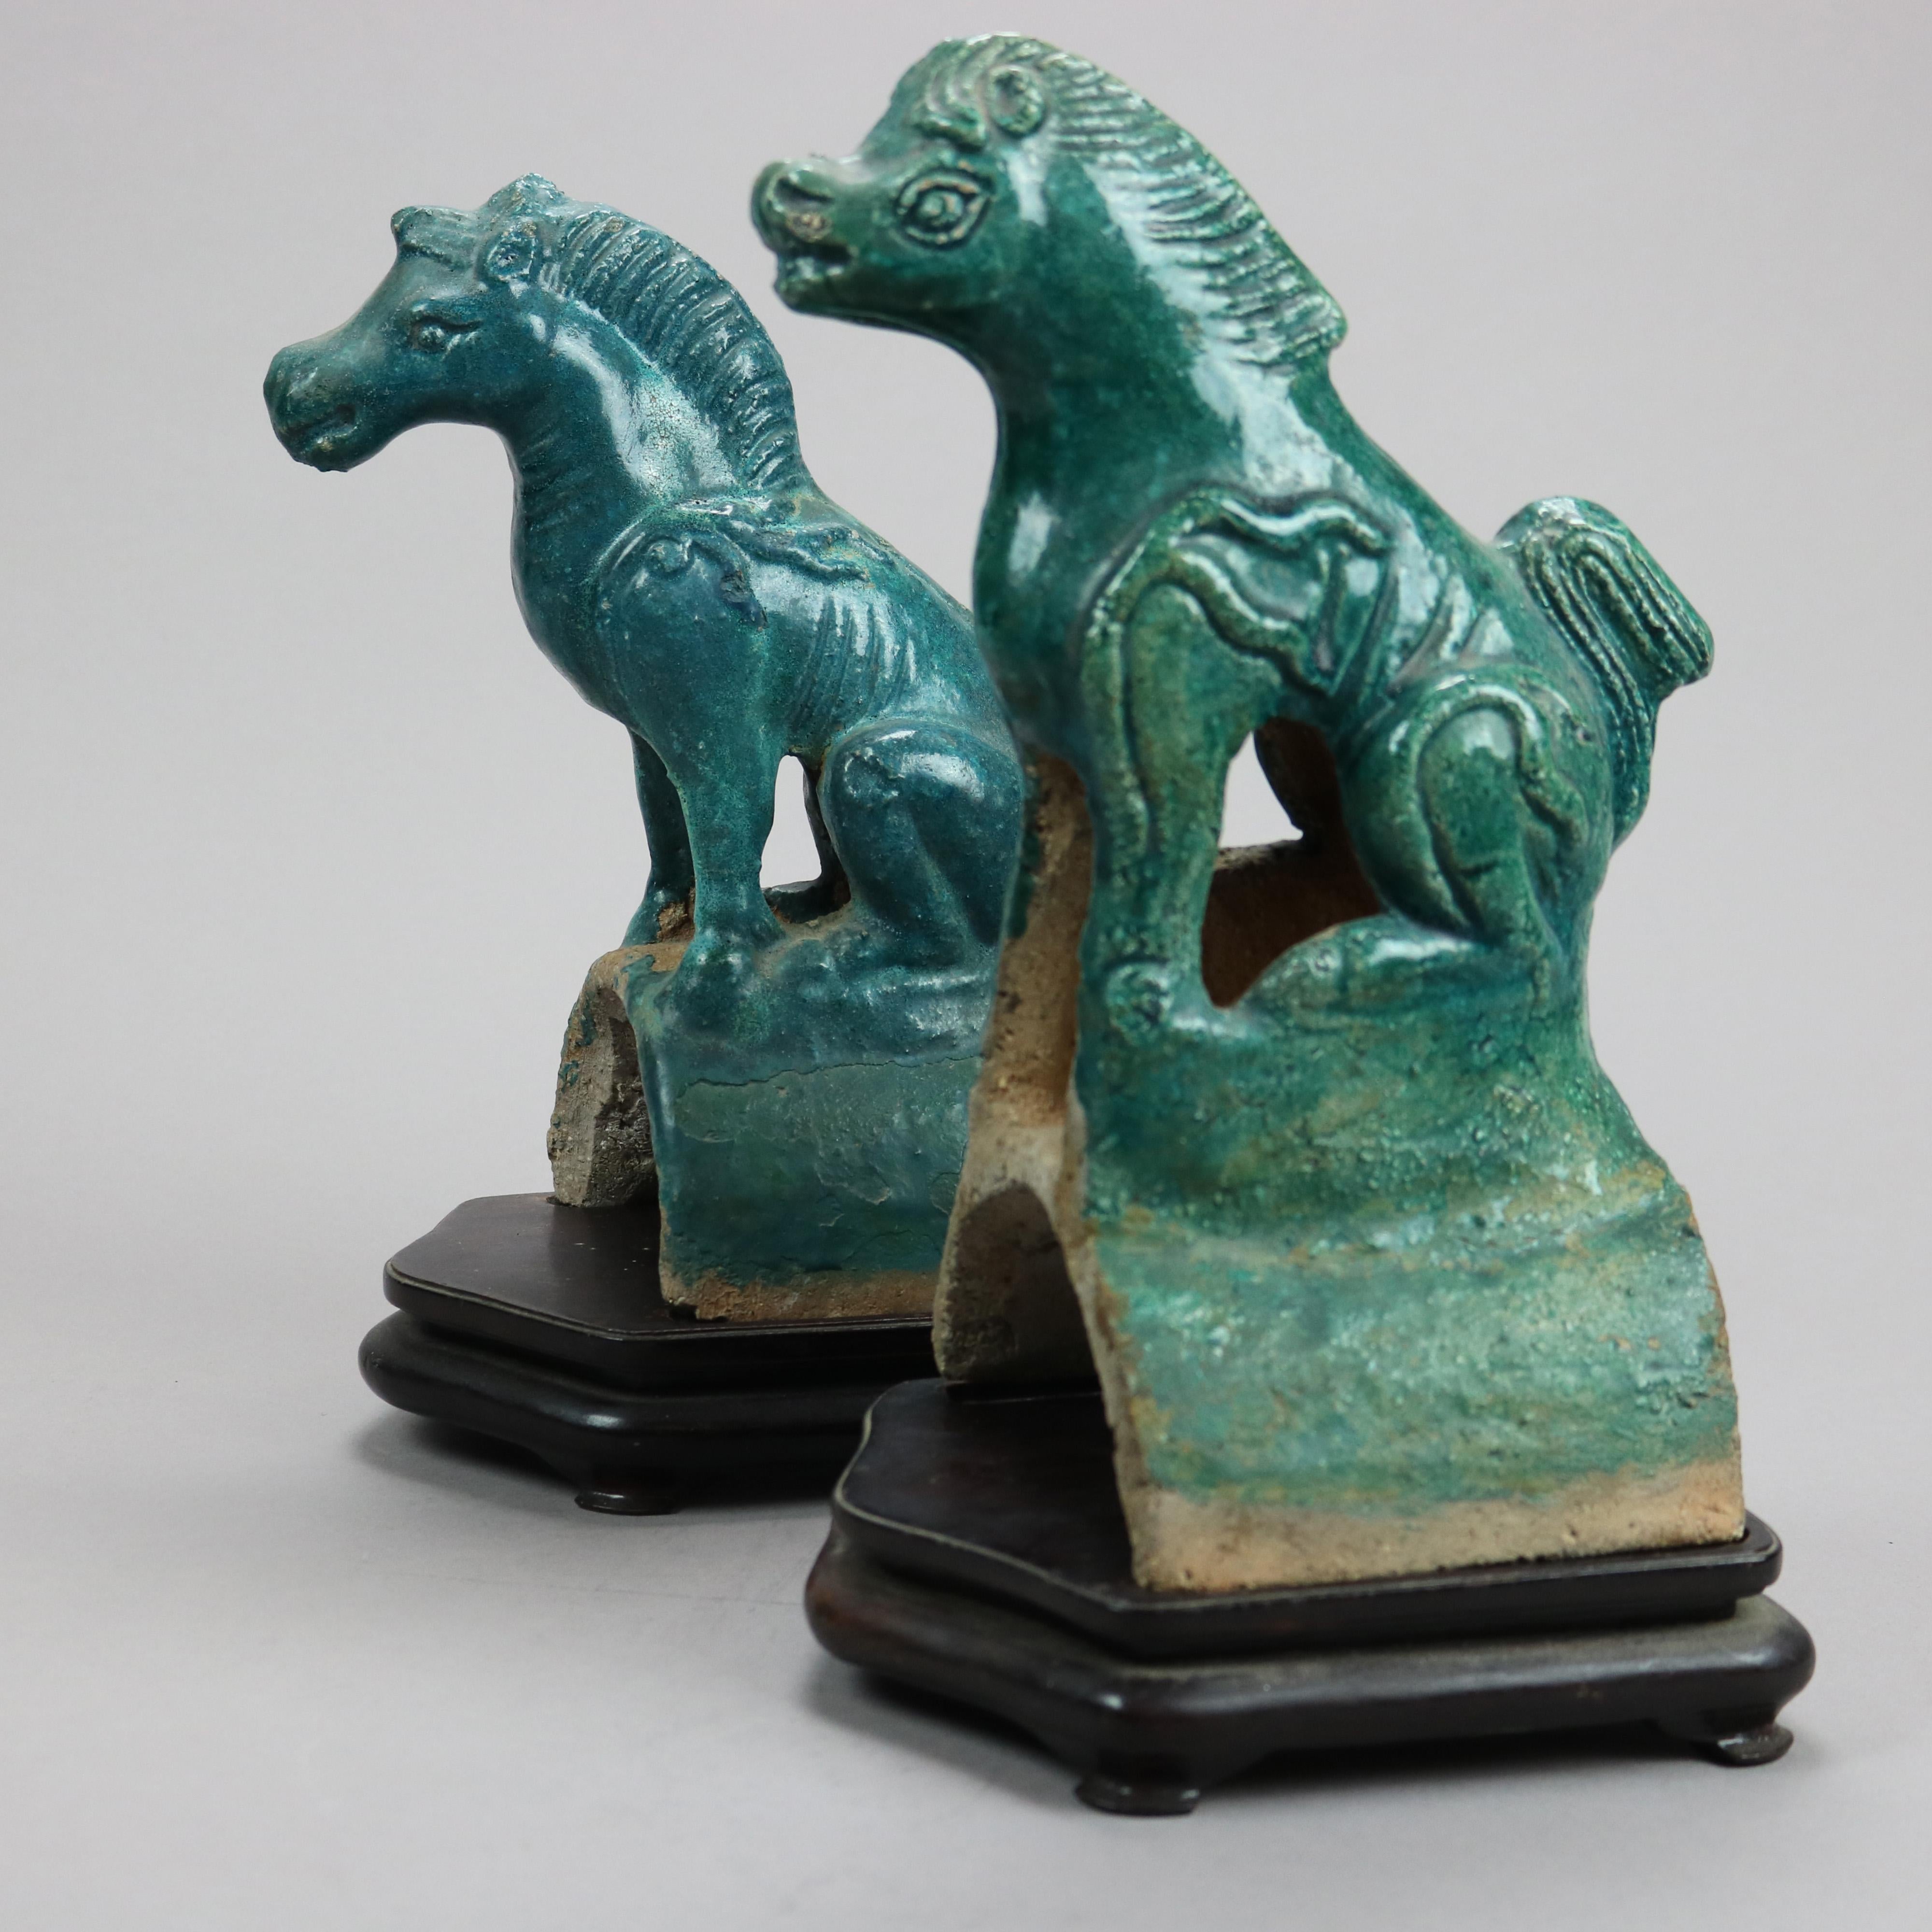 19th Century Antique Pair of Large Chinese Hand Crafted Terracotta Horse Figures, 19th C